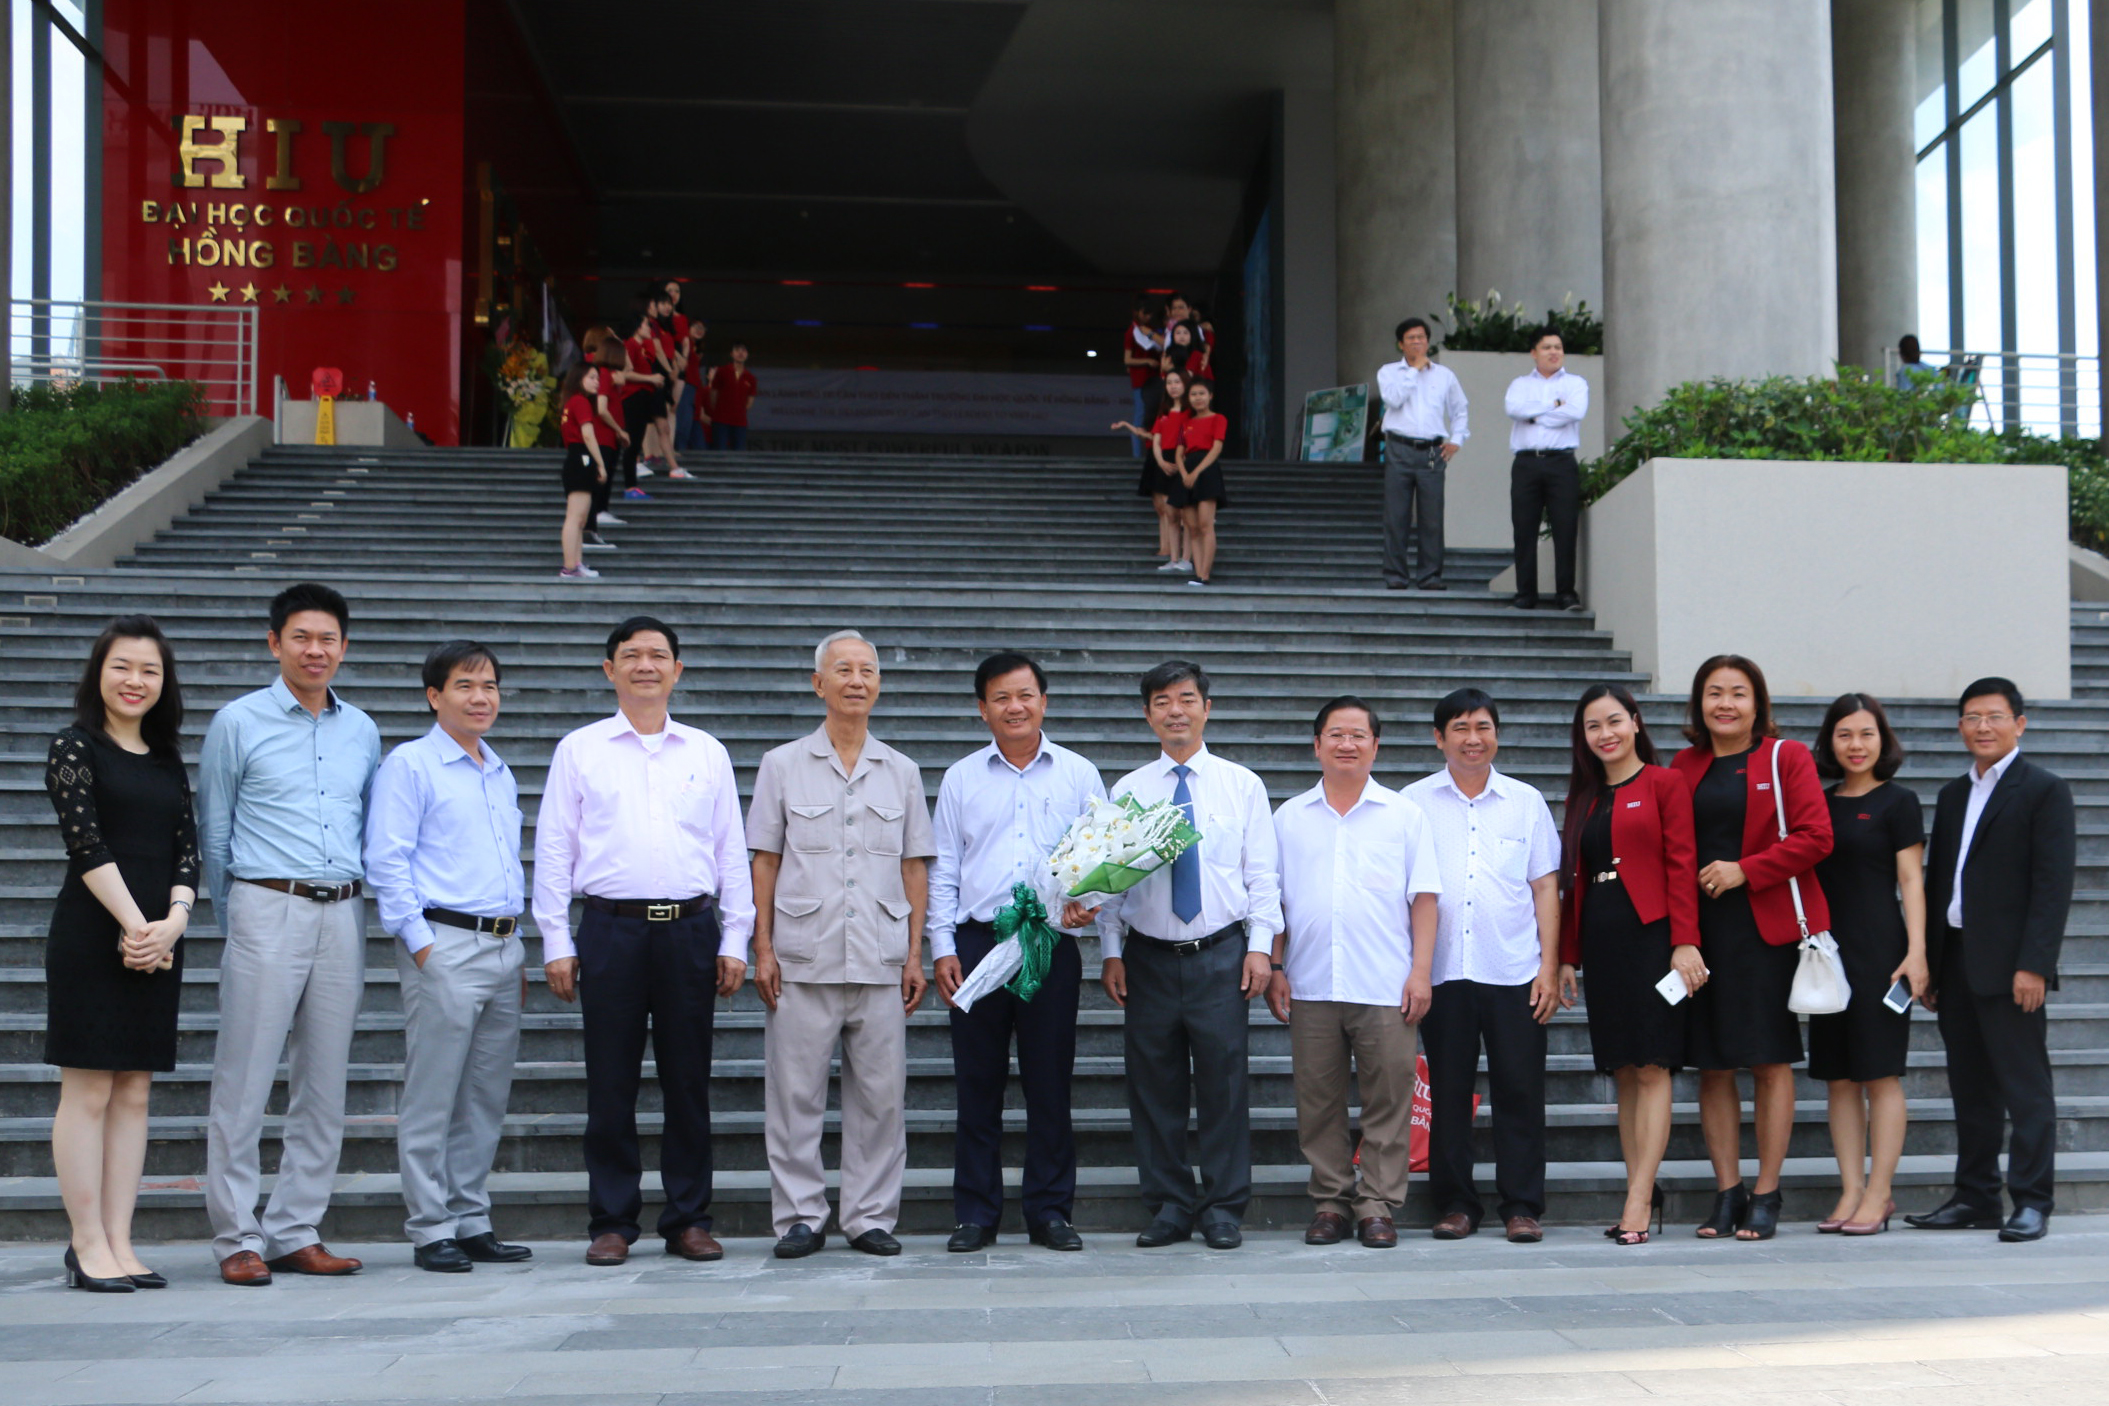 Can Tho City's delegation taken photos in front of the "Ship of Knowledge" of HIU